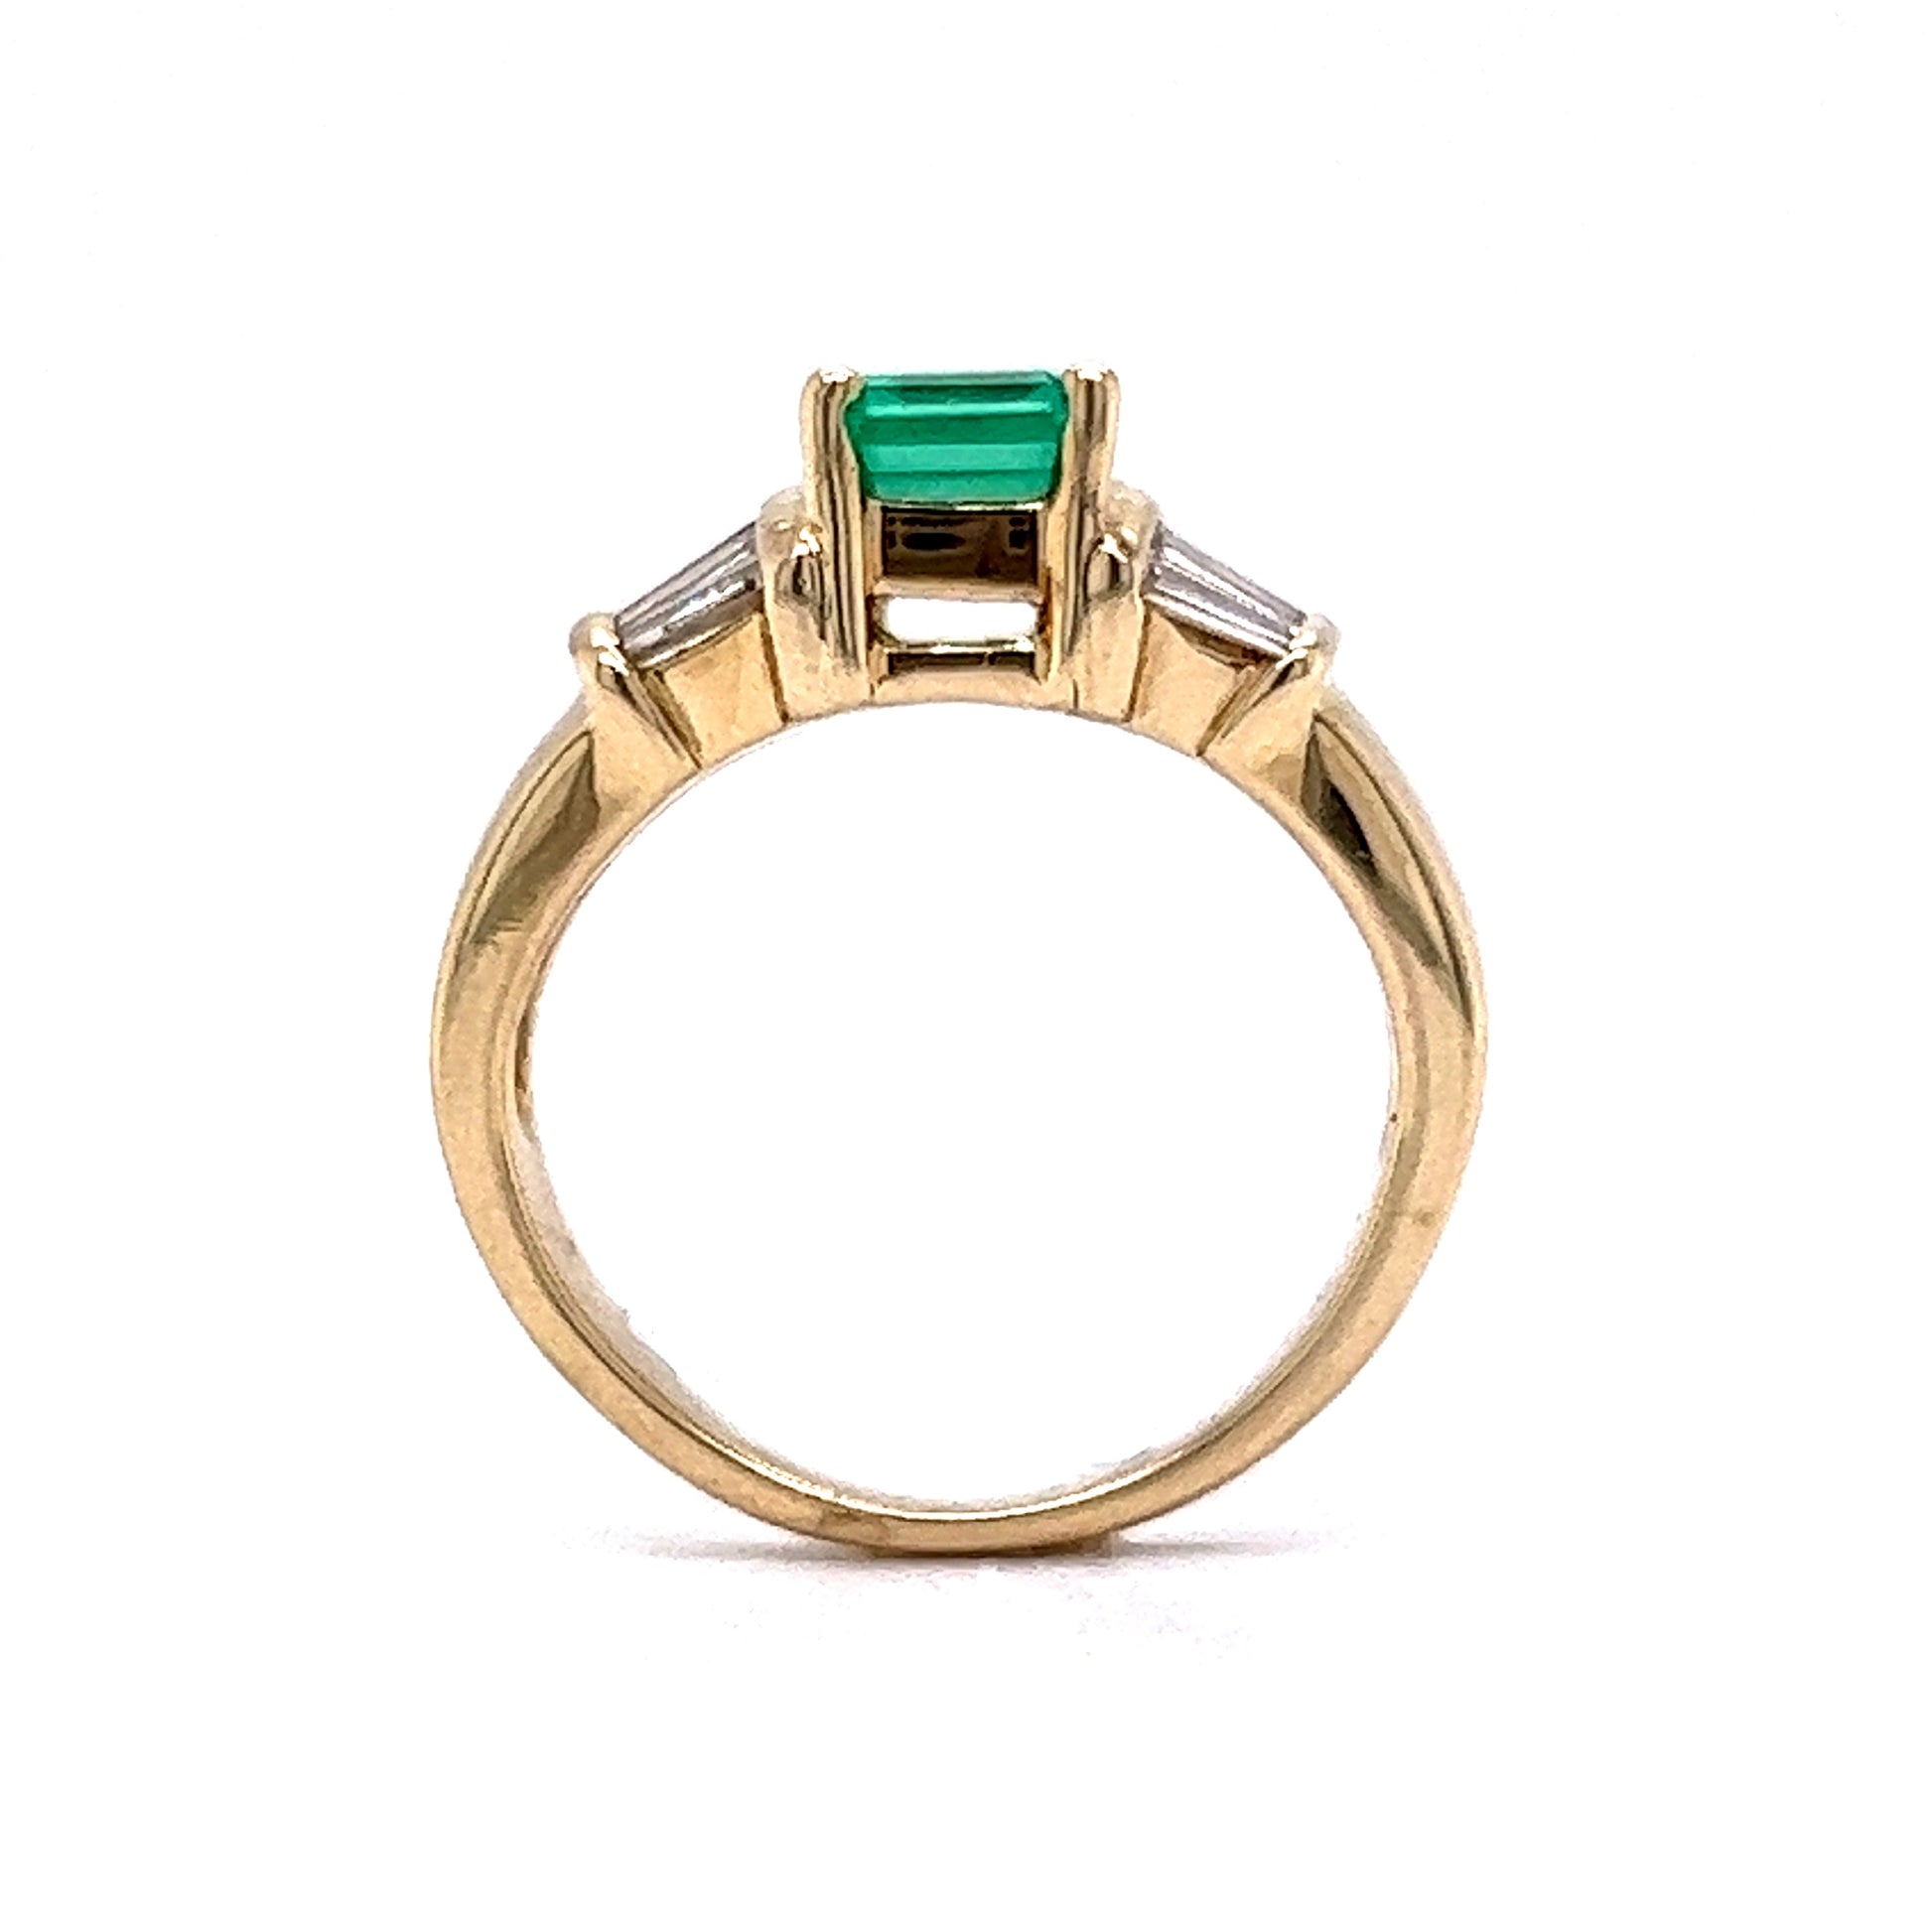 .88 Emerald & Diamond Engagement Ring in 14k Yellow GoldComposition: 14 Karat Yellow GoldRing Size: 4.0Total Diamond Weight: .14 ctTotal Gram Weight: 4.6 gInscription: 14k